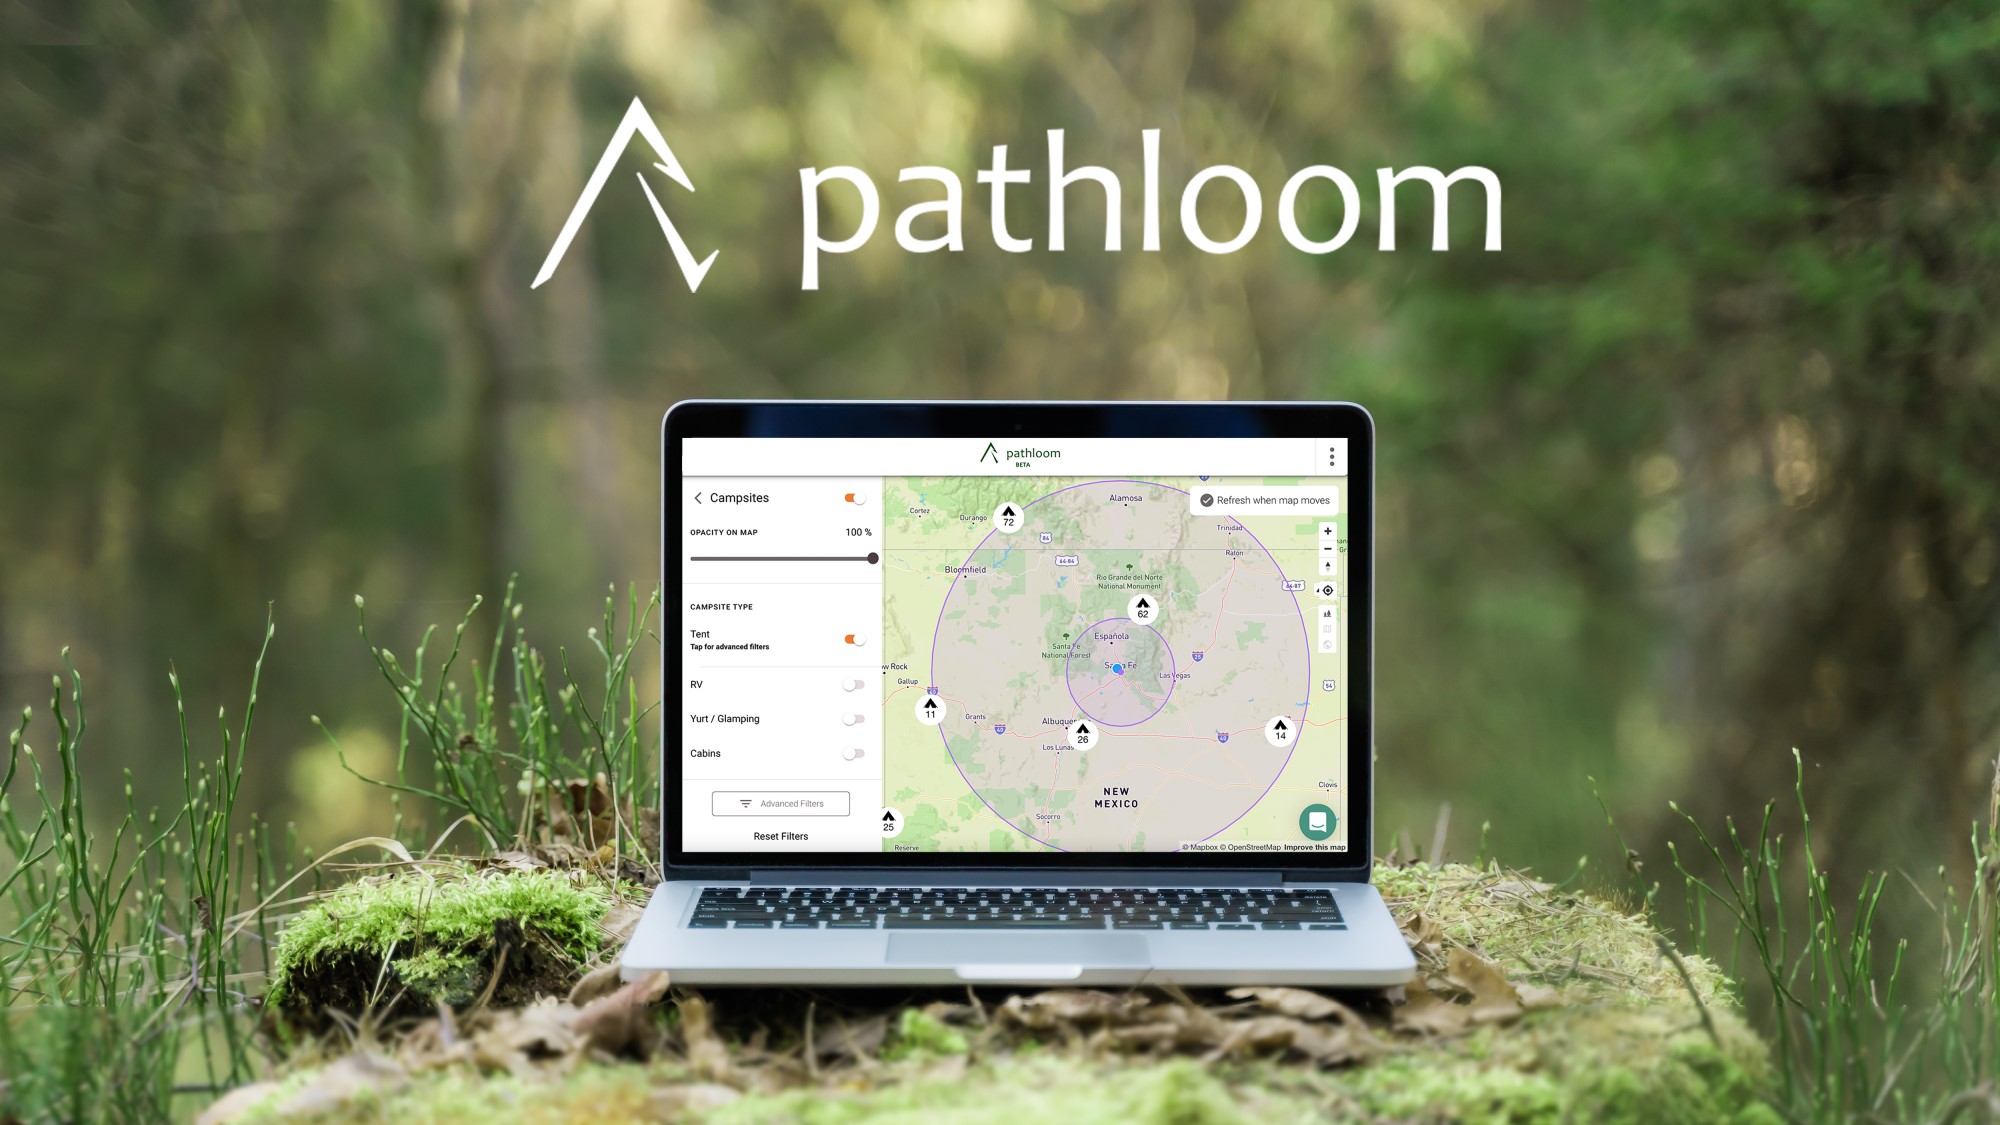 laptop on a rock in nature with the Pathloom website on the screen and logo above it